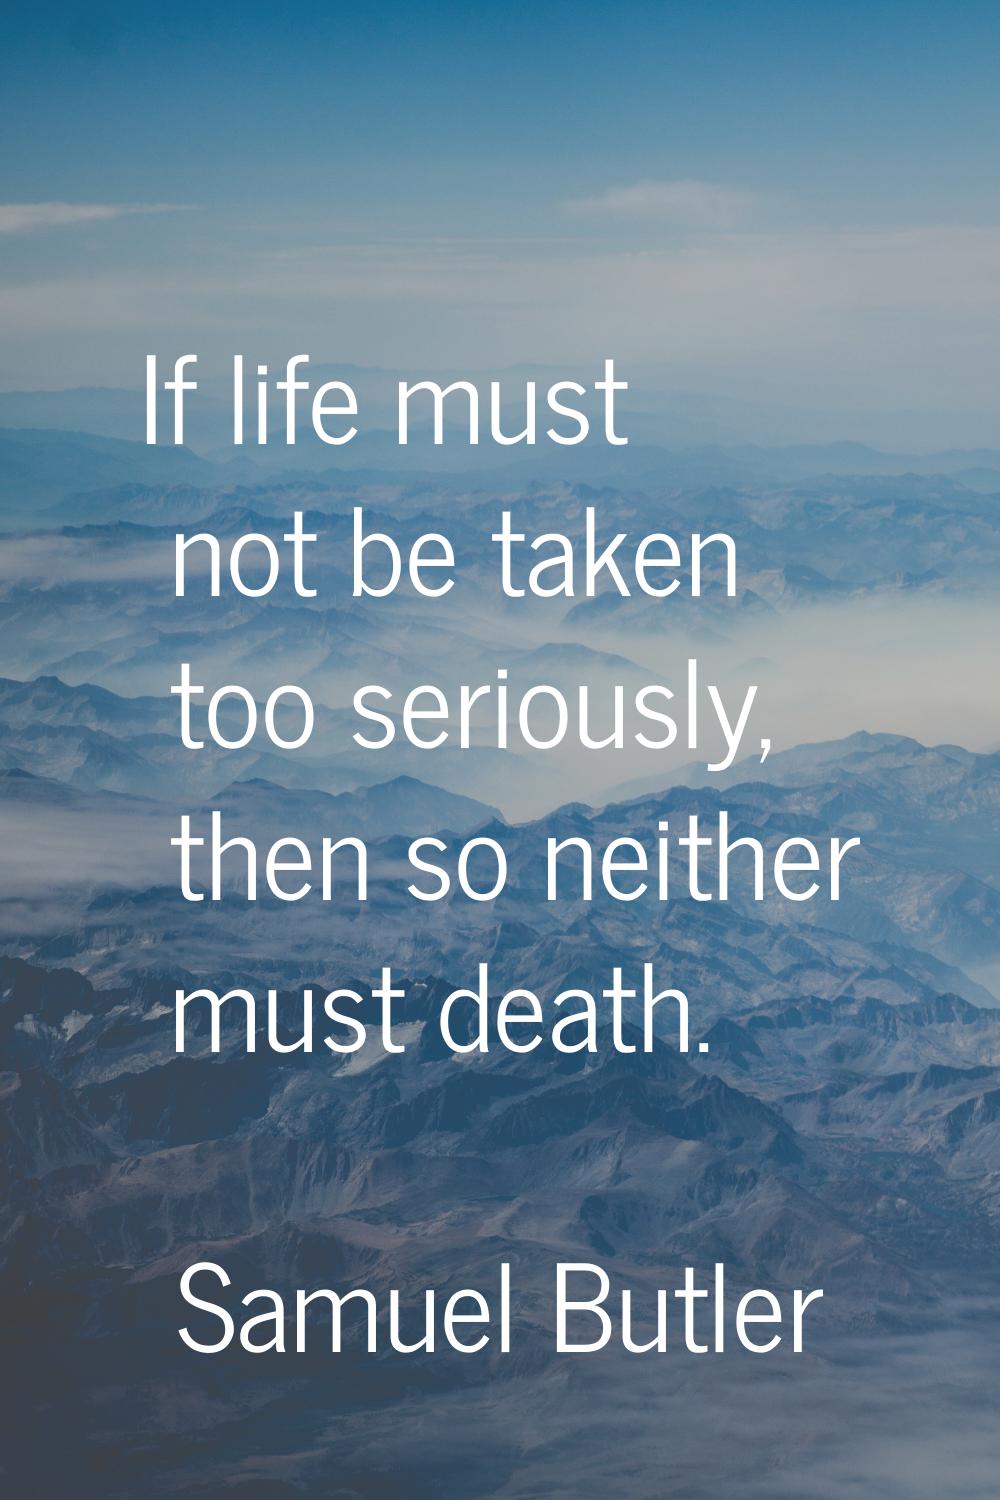 If life must not be taken too seriously, then so neither must death.